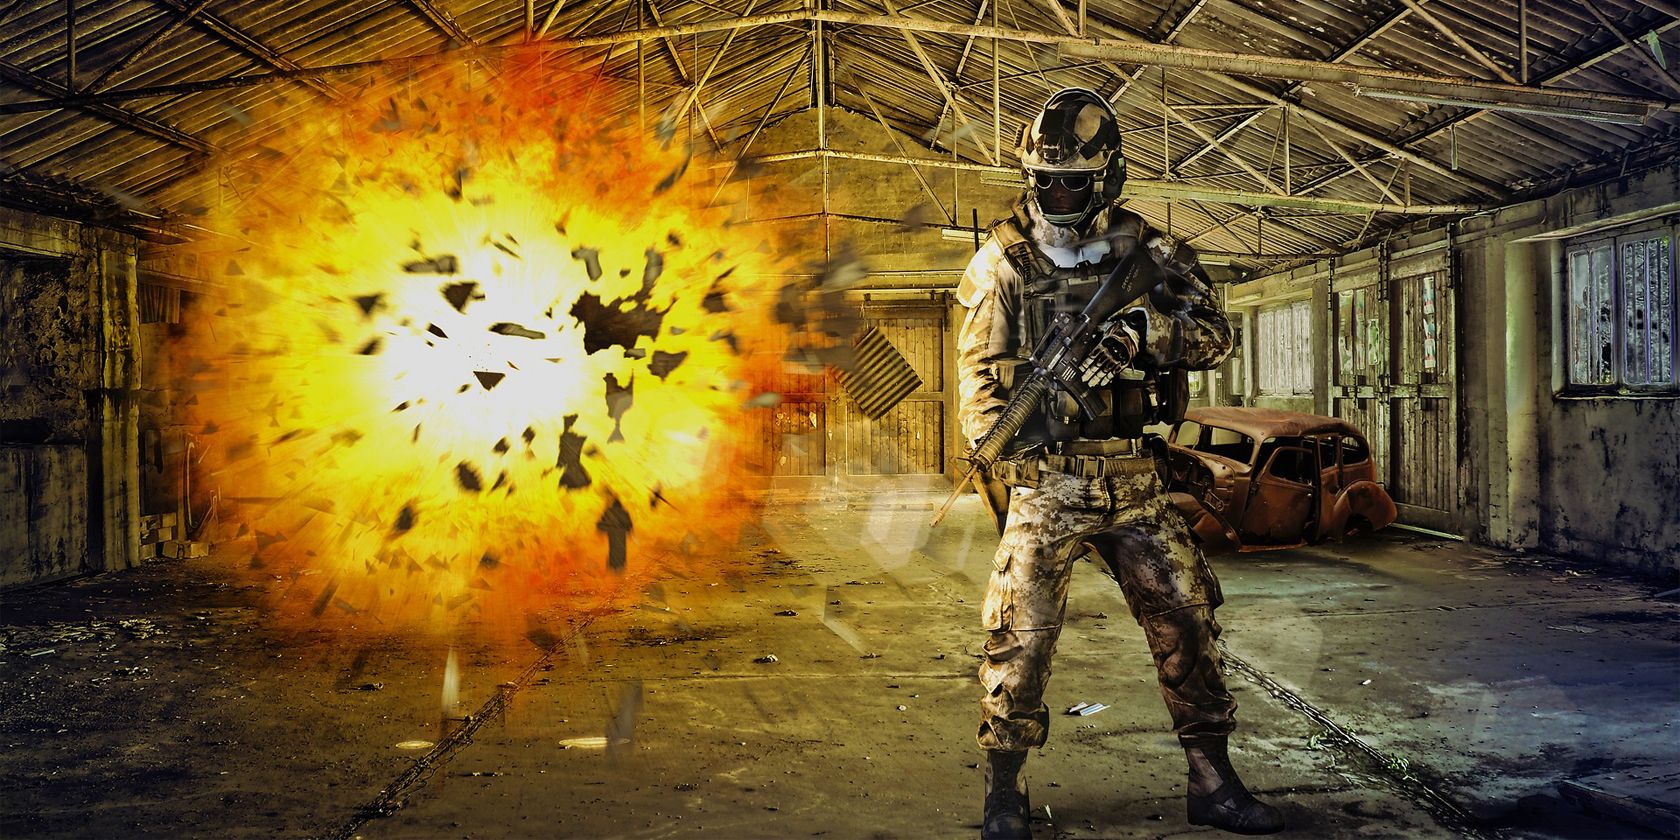 soldier in an abandoned warehouse with an explosion in the background